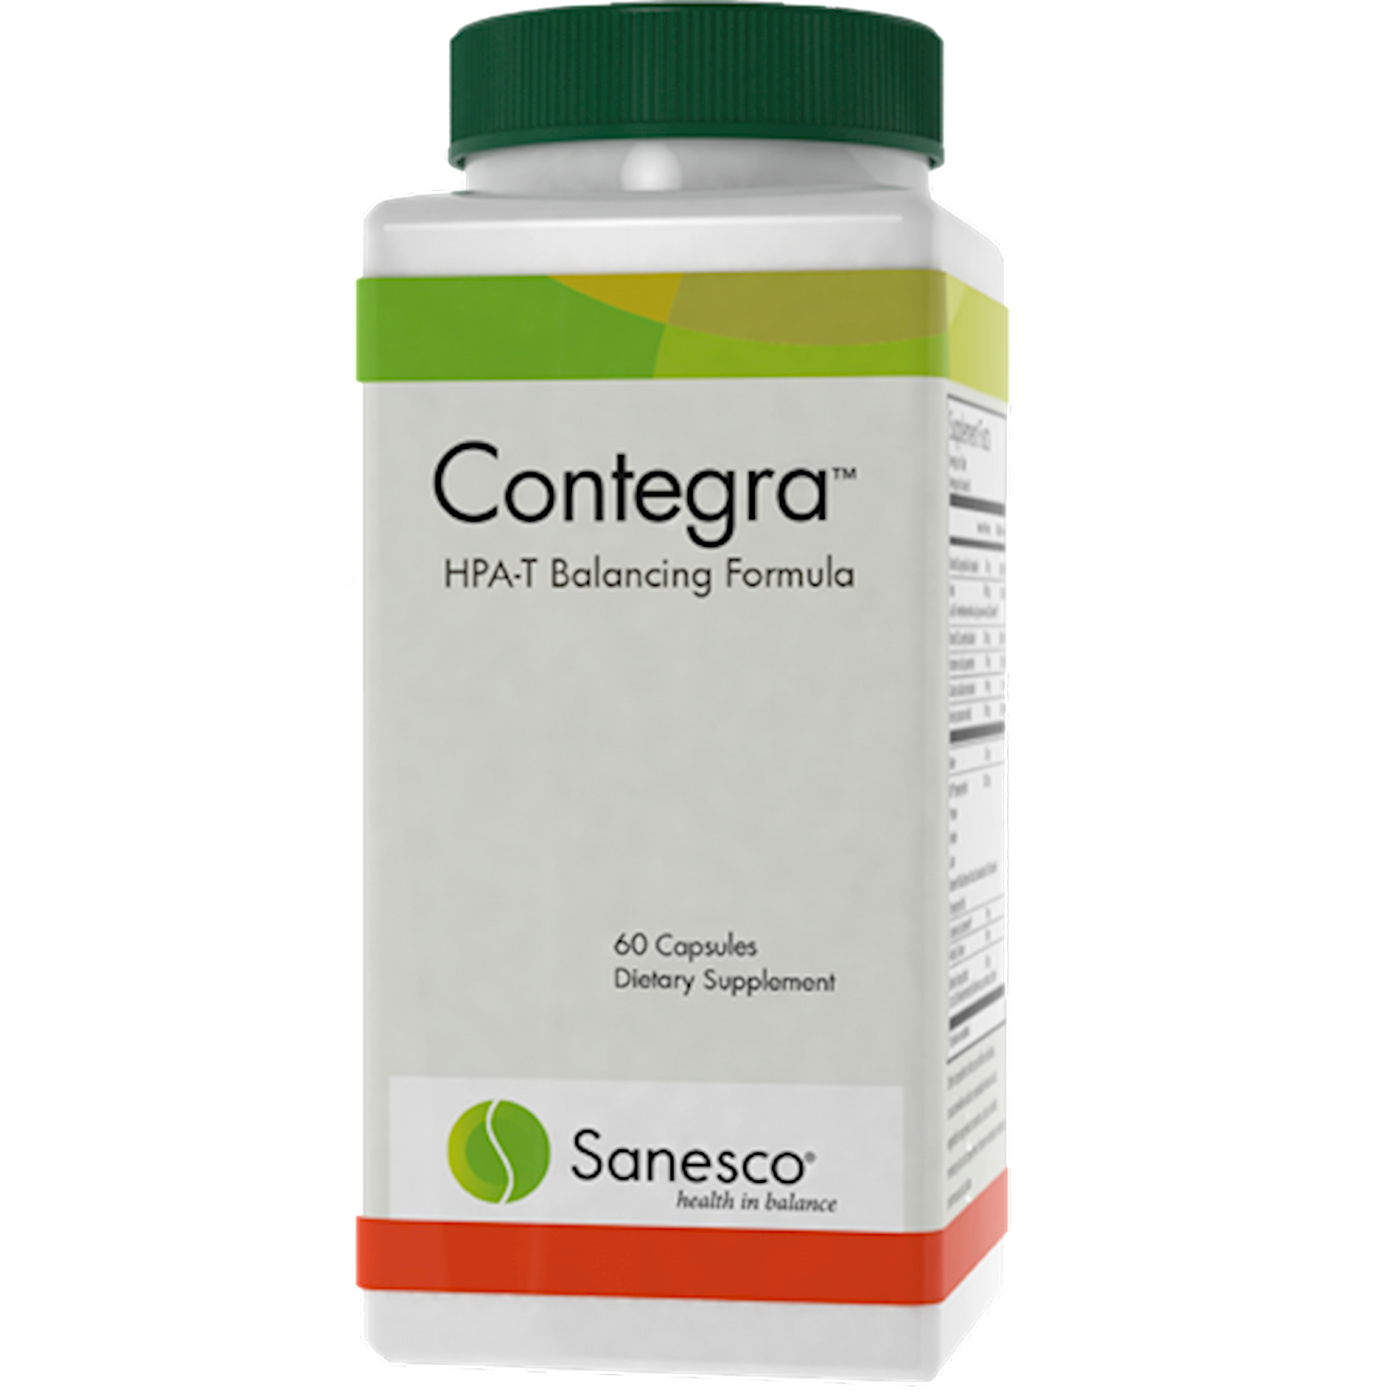 Contegra ules Curated Wellness